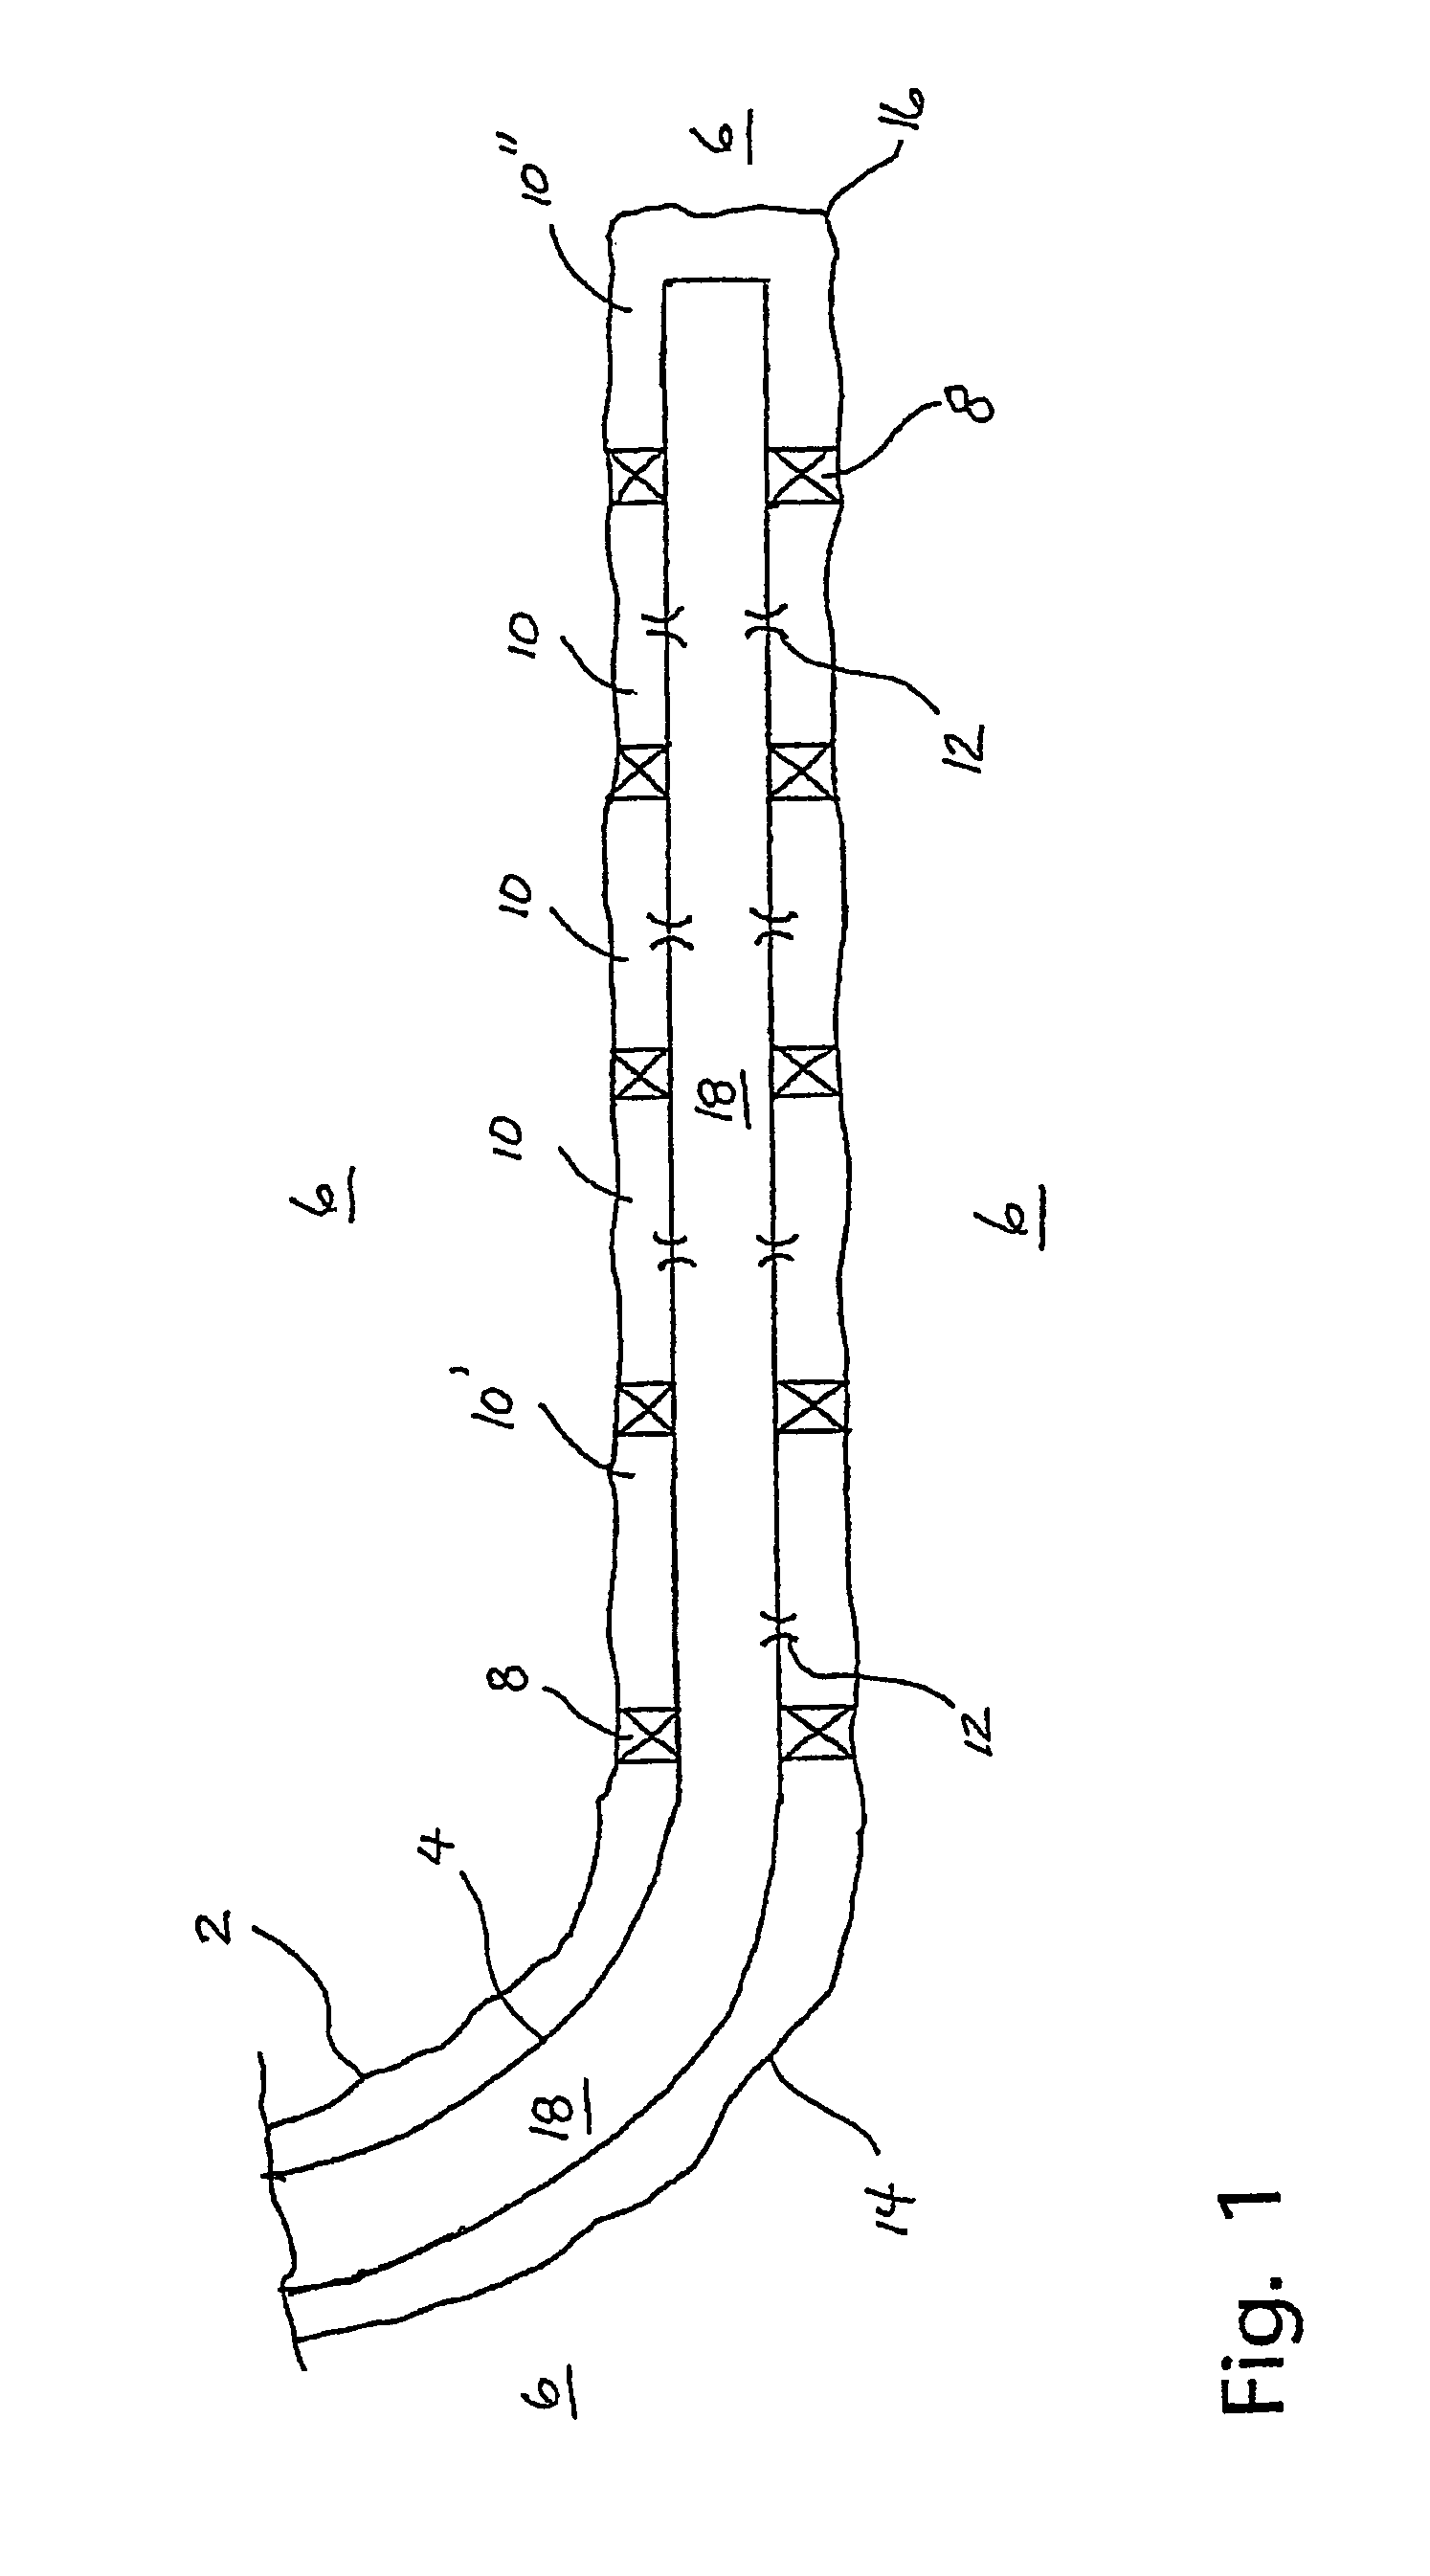 Flow control device for an injection pipe string